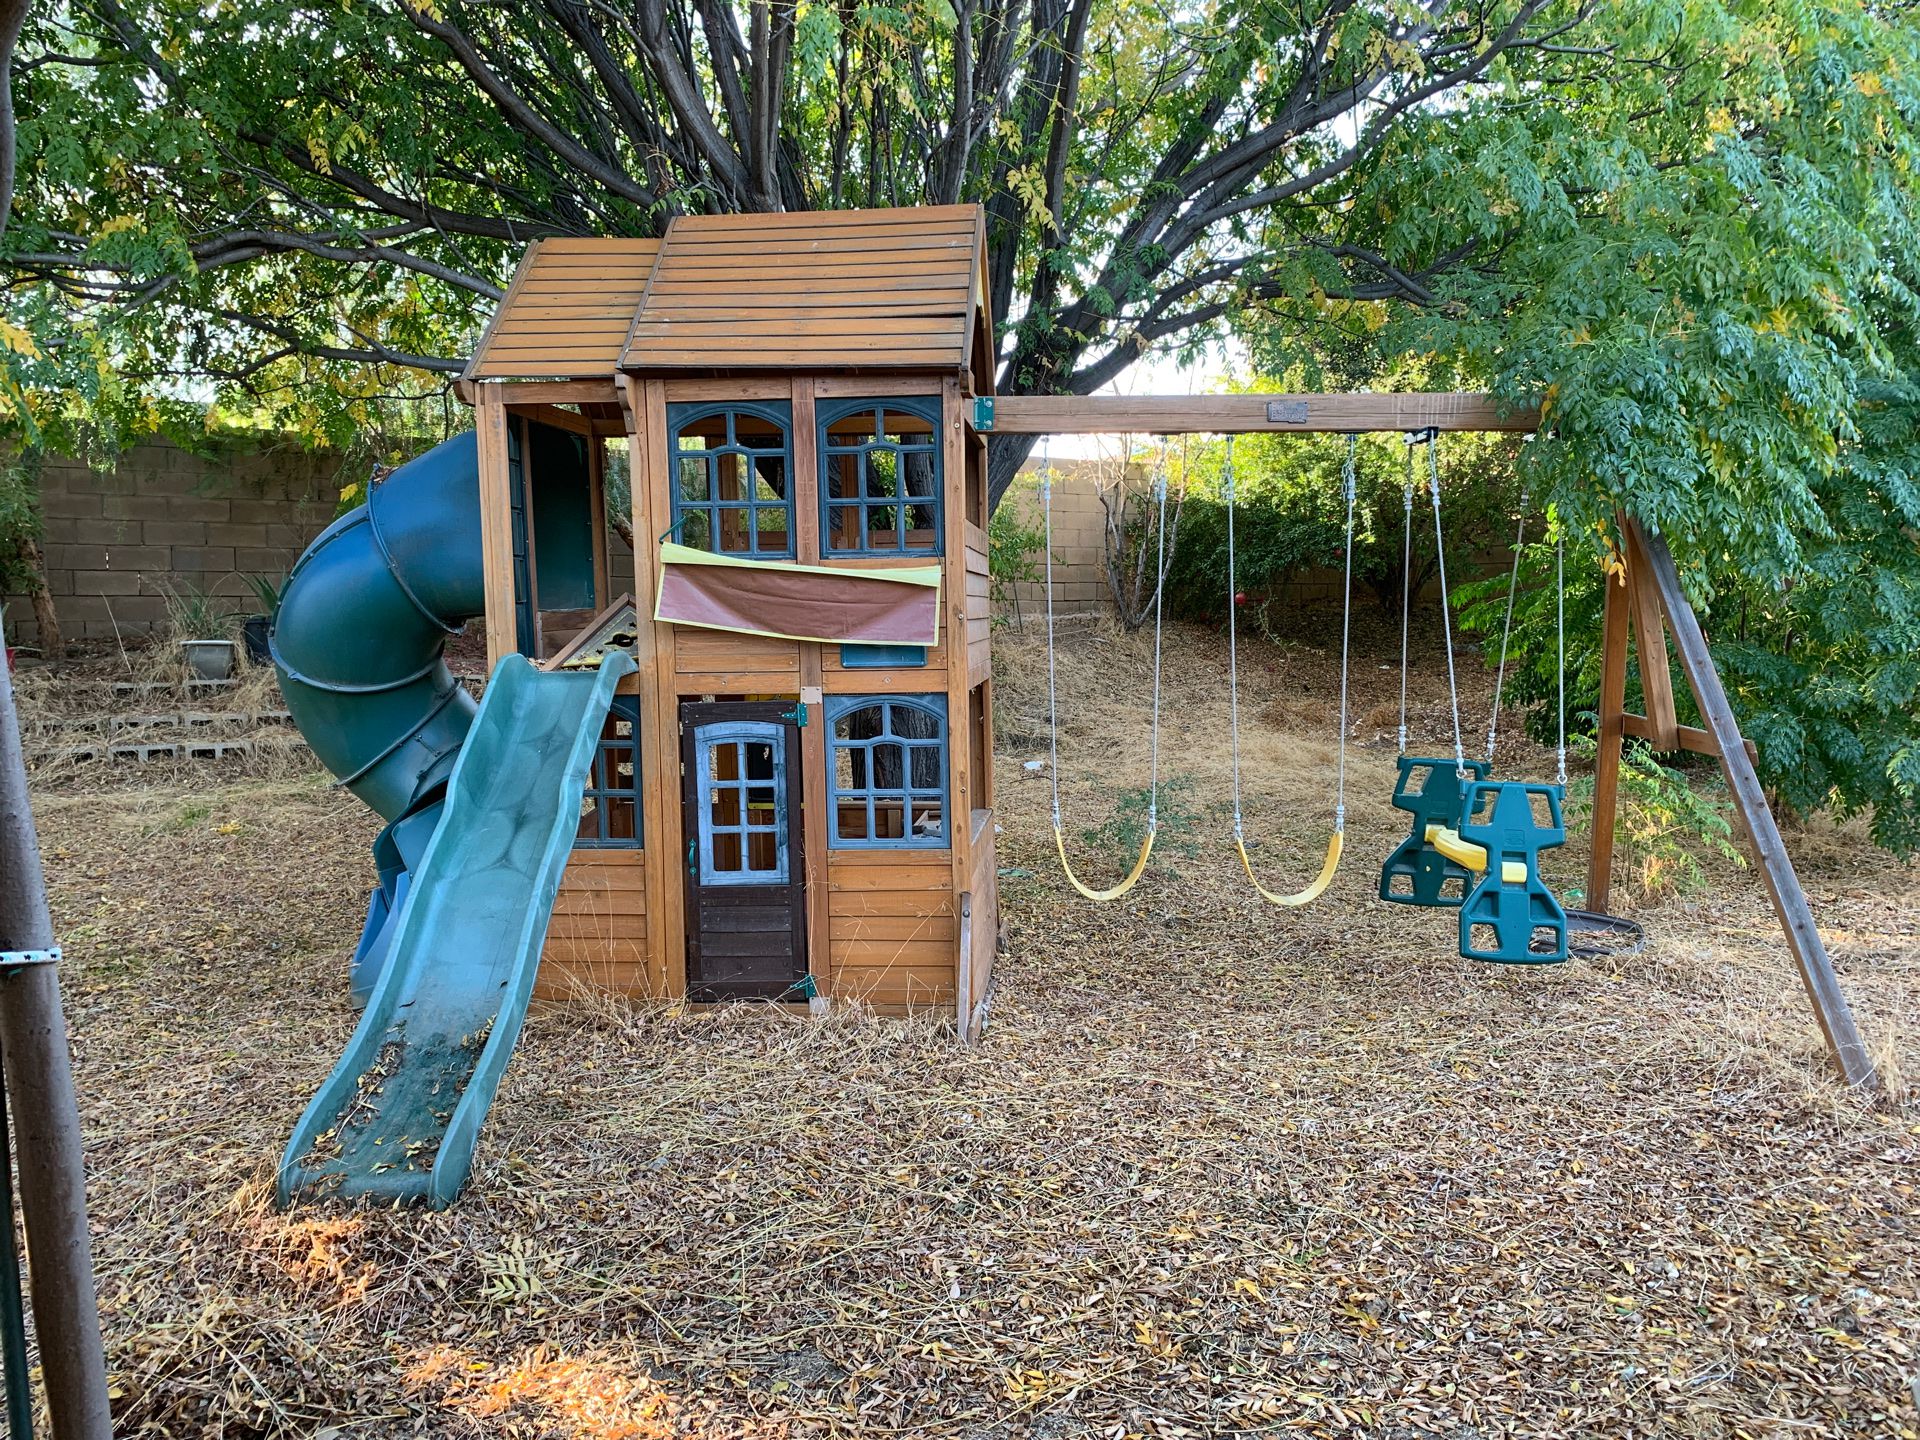 Wooden Playhouse Swing Set for Kids